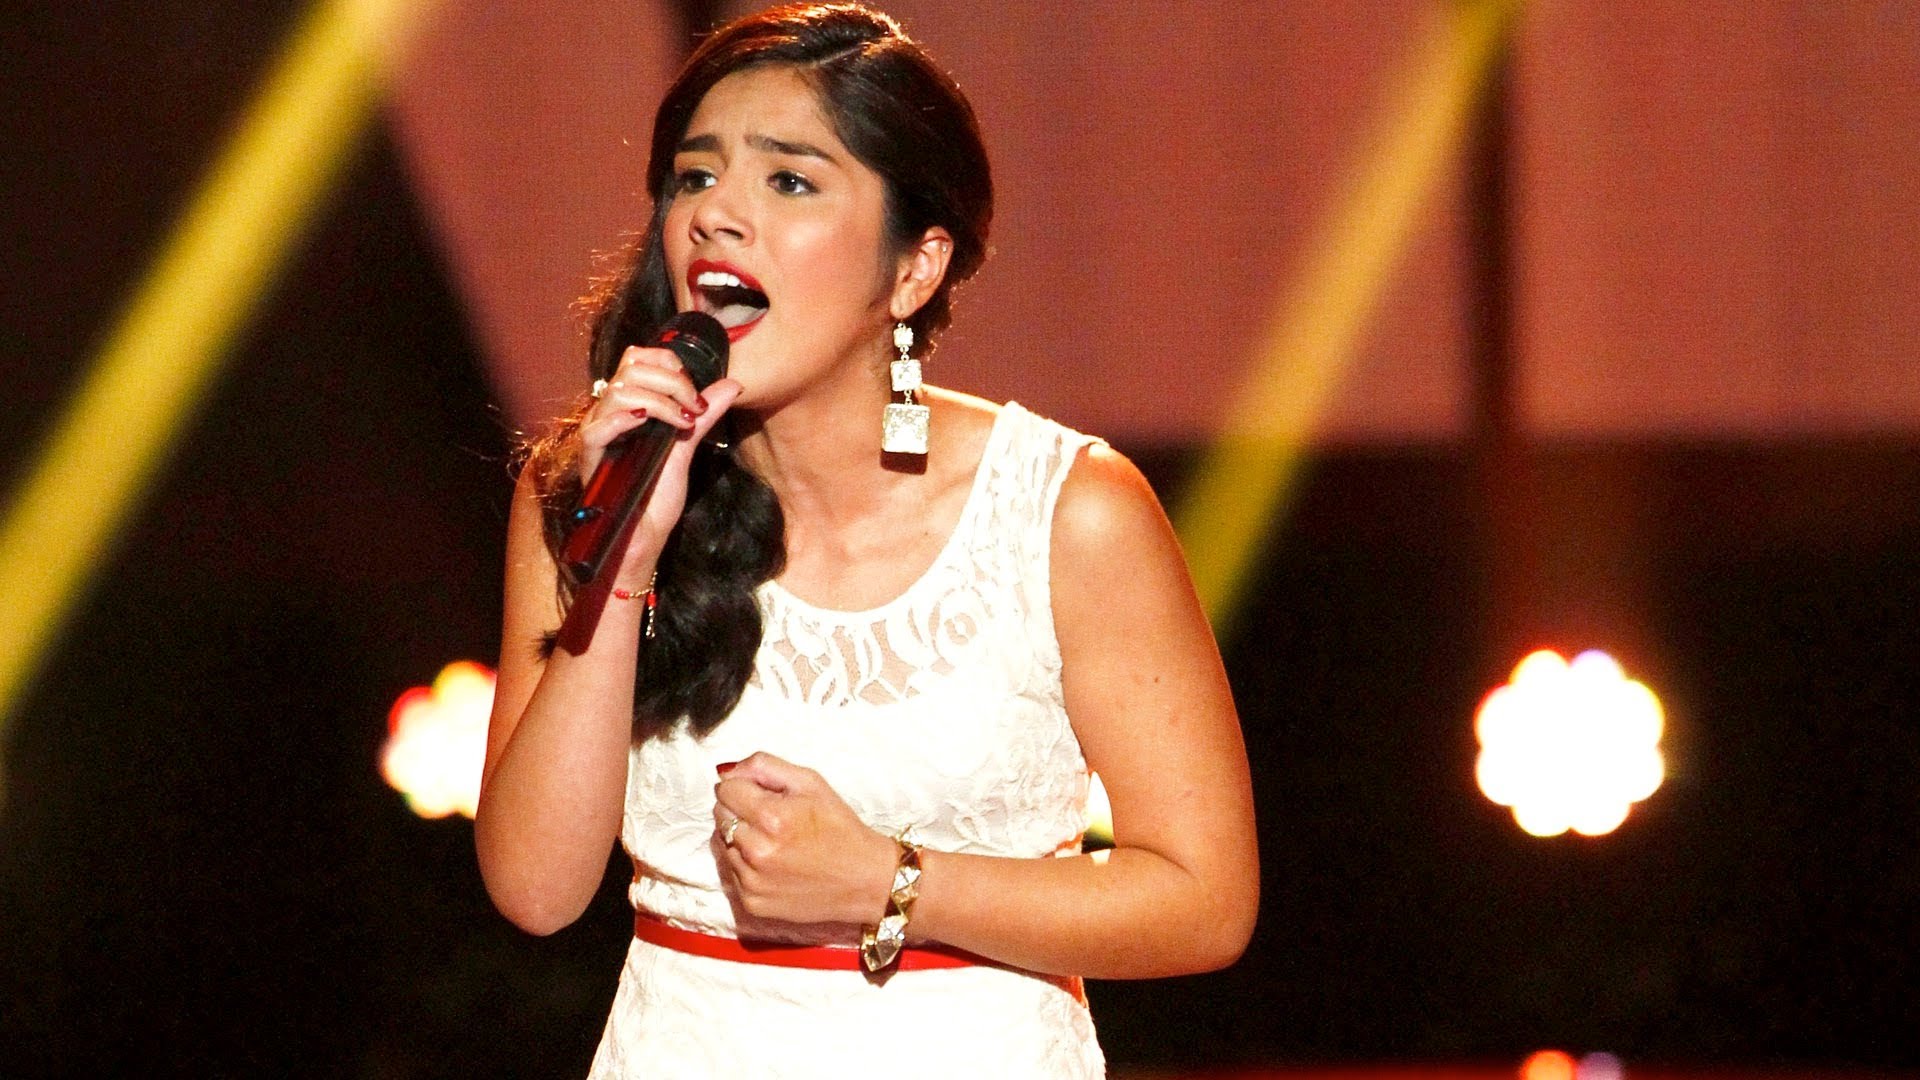 Exclusive! Can Cáthia From ‘The Voice’ Become The Next Big Pop Star?